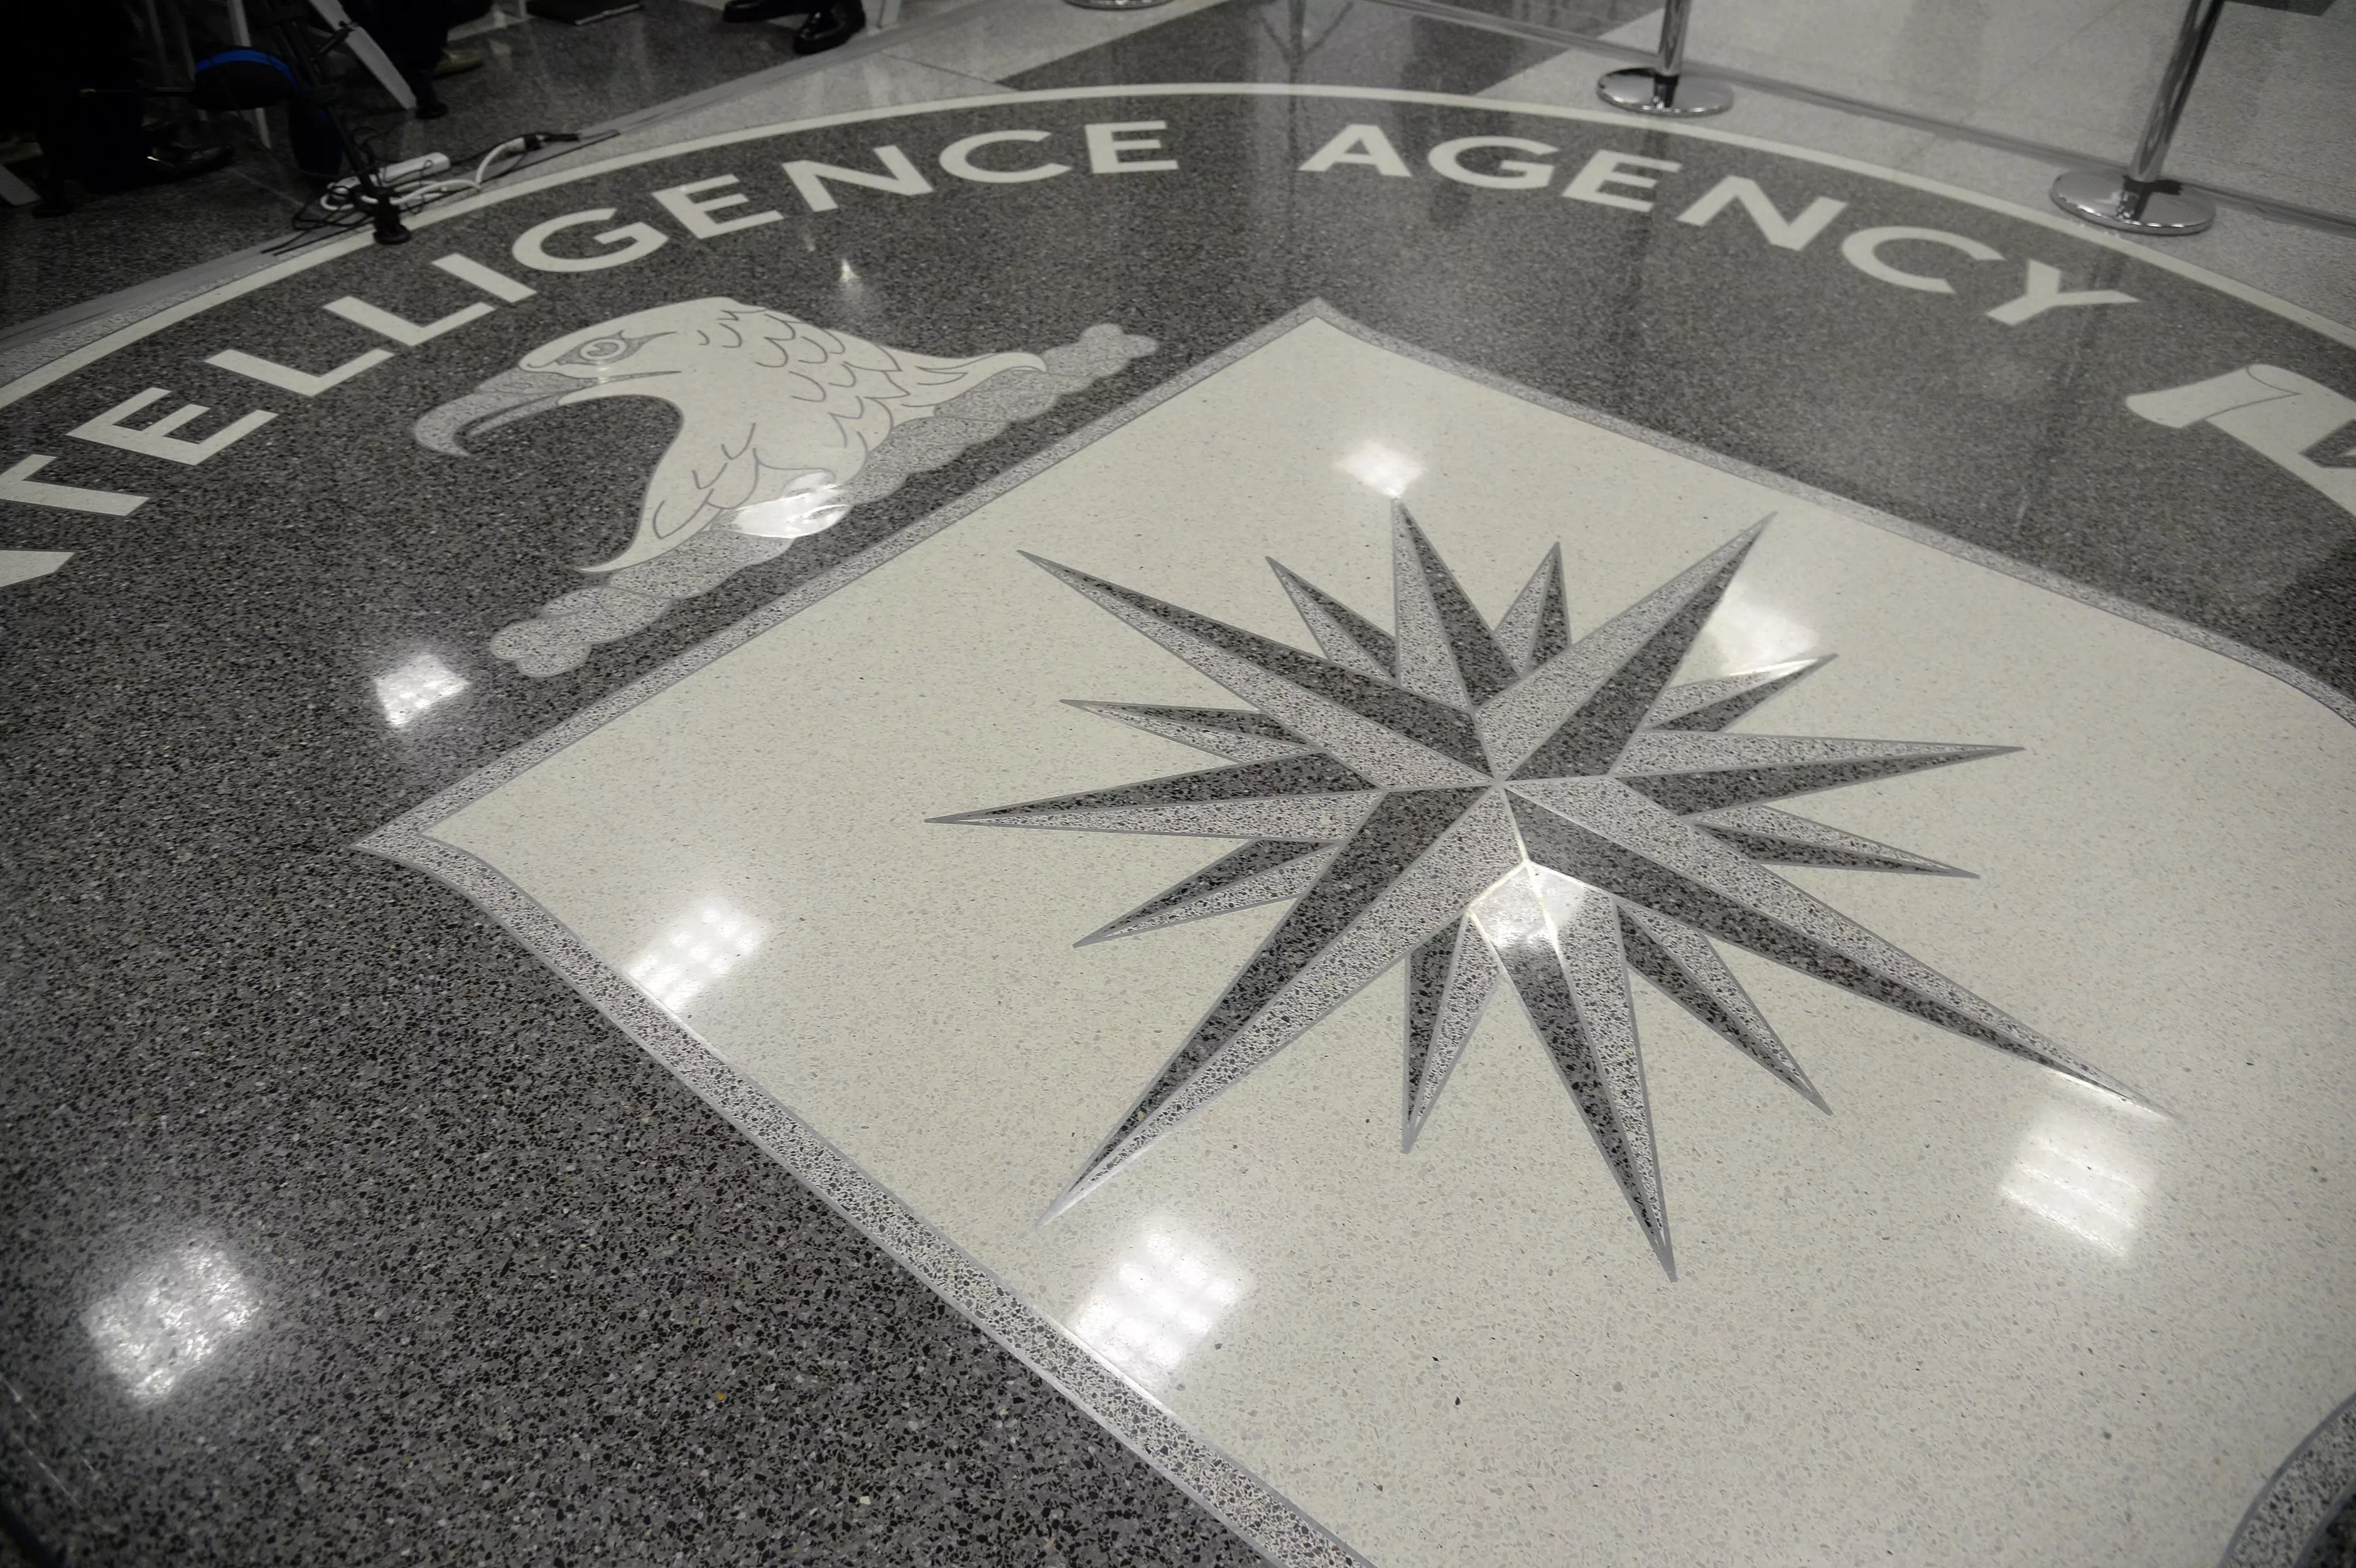 Greenewald says there's no way of verifying if the CIA has released all the documents it has.